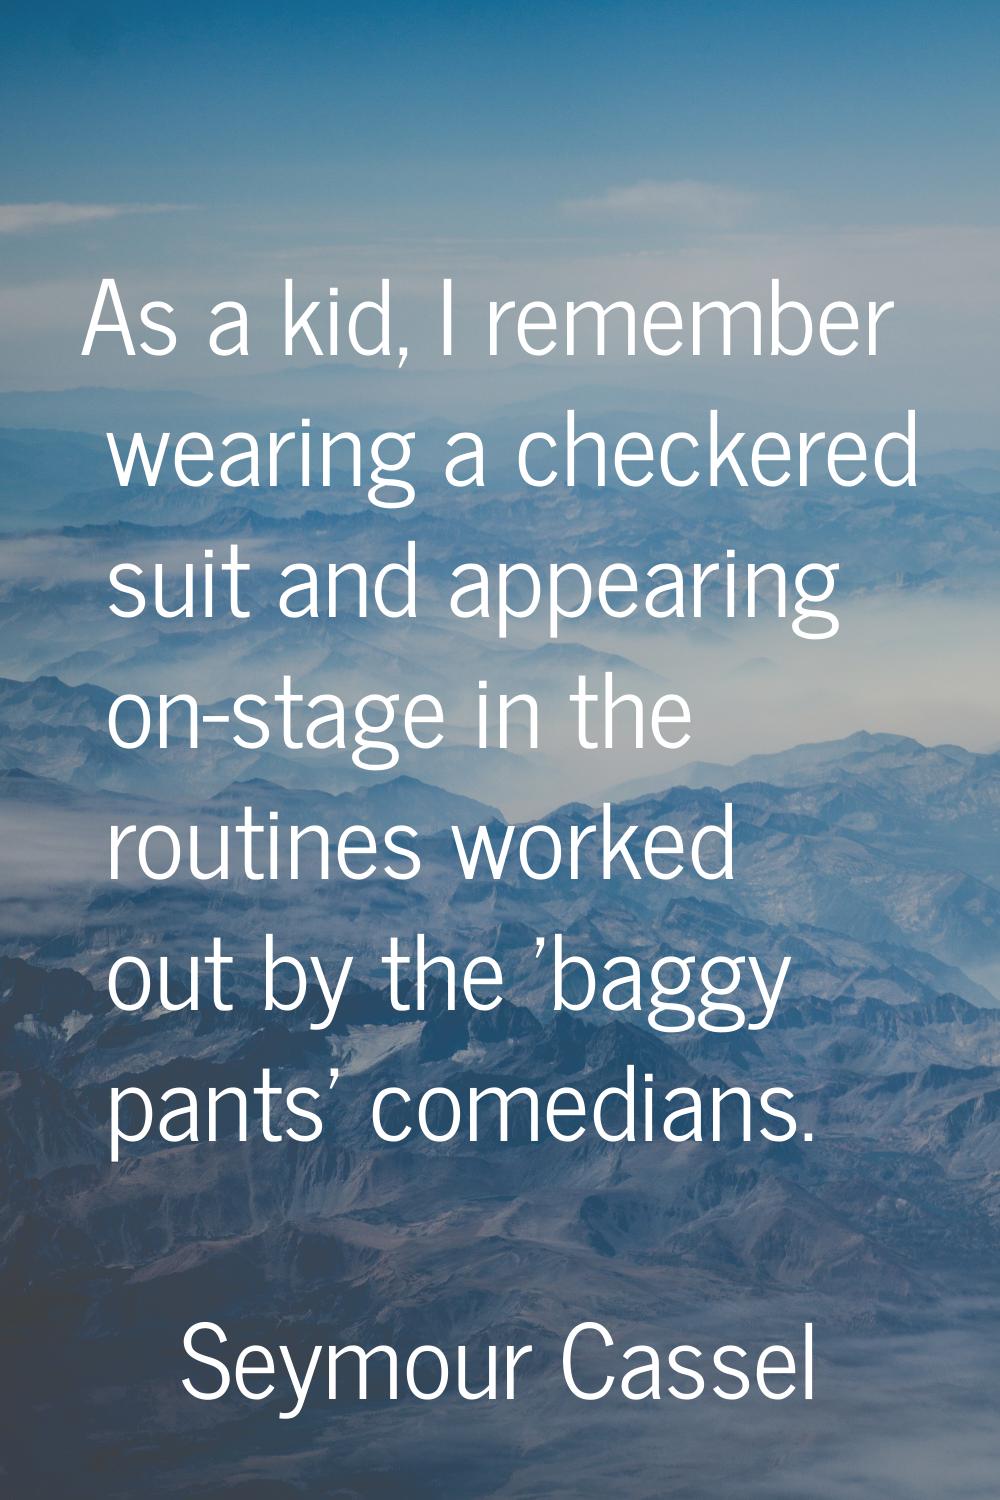 As a kid, I remember wearing a checkered suit and appearing on-stage in the routines worked out by 